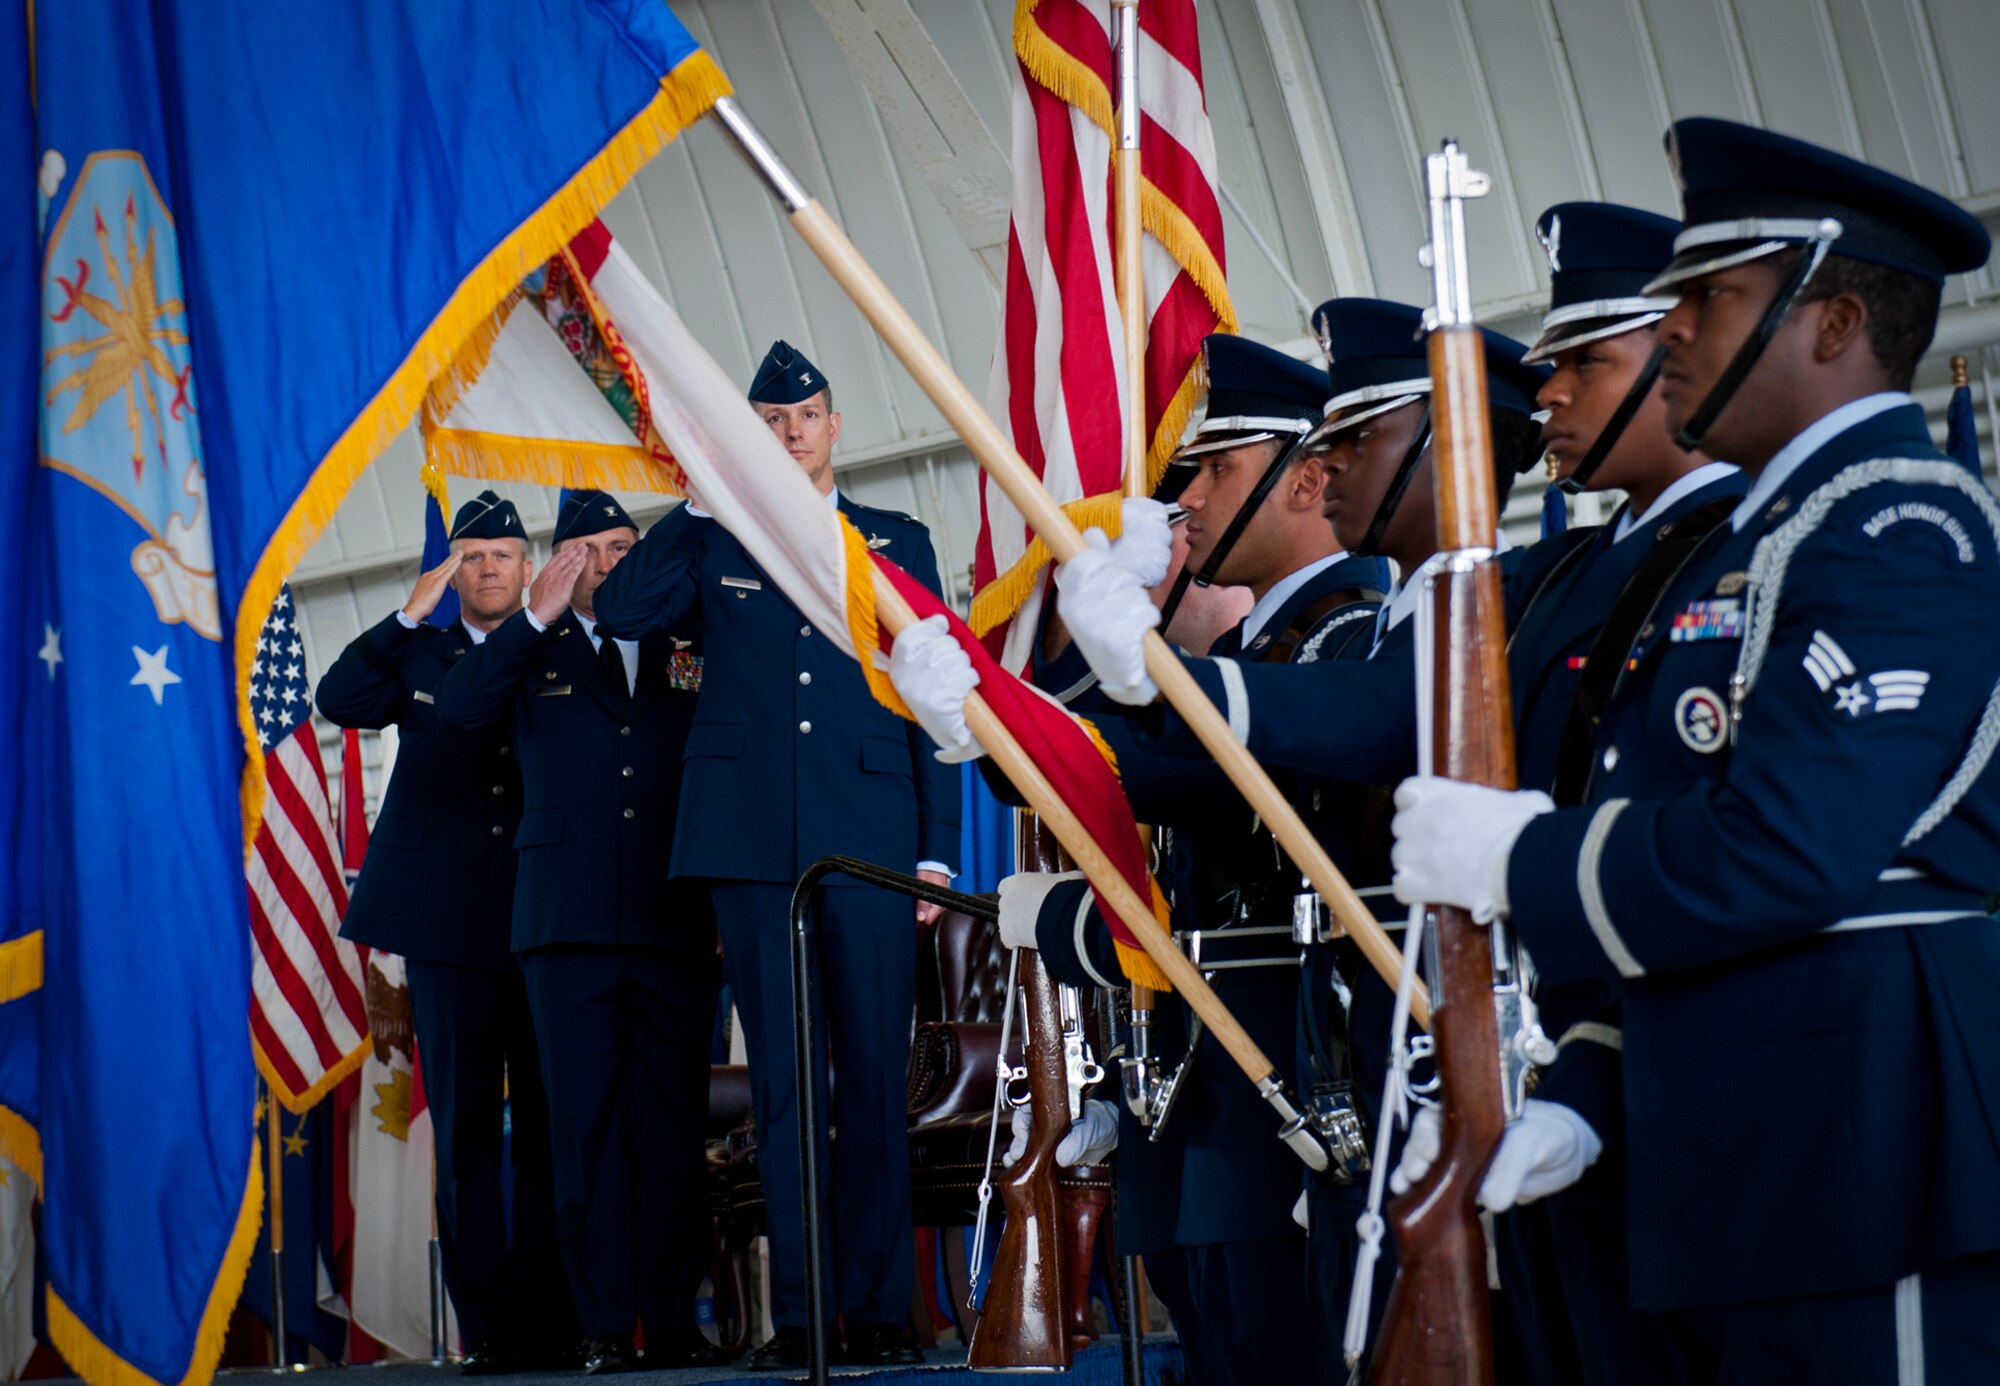 Maj. Gen. Jeffrey Lofgren, the U.S. Air Force Warfare Center commander, Col. David Hicks and the new 53rd Wing Commander, Alexus Grynkewich, salute the flag during the National Anthem at the wing’s change of command ceremony May 30 at Eglin Air Force Base, Fla.  Grynkewich took command of the wing from Hicks, who leaves to become the deputy director of operations for North American Aerospace Defense Command at Peterson, AFB, Colo.  (U.S. Air Force photo/Samuel King Jr.)